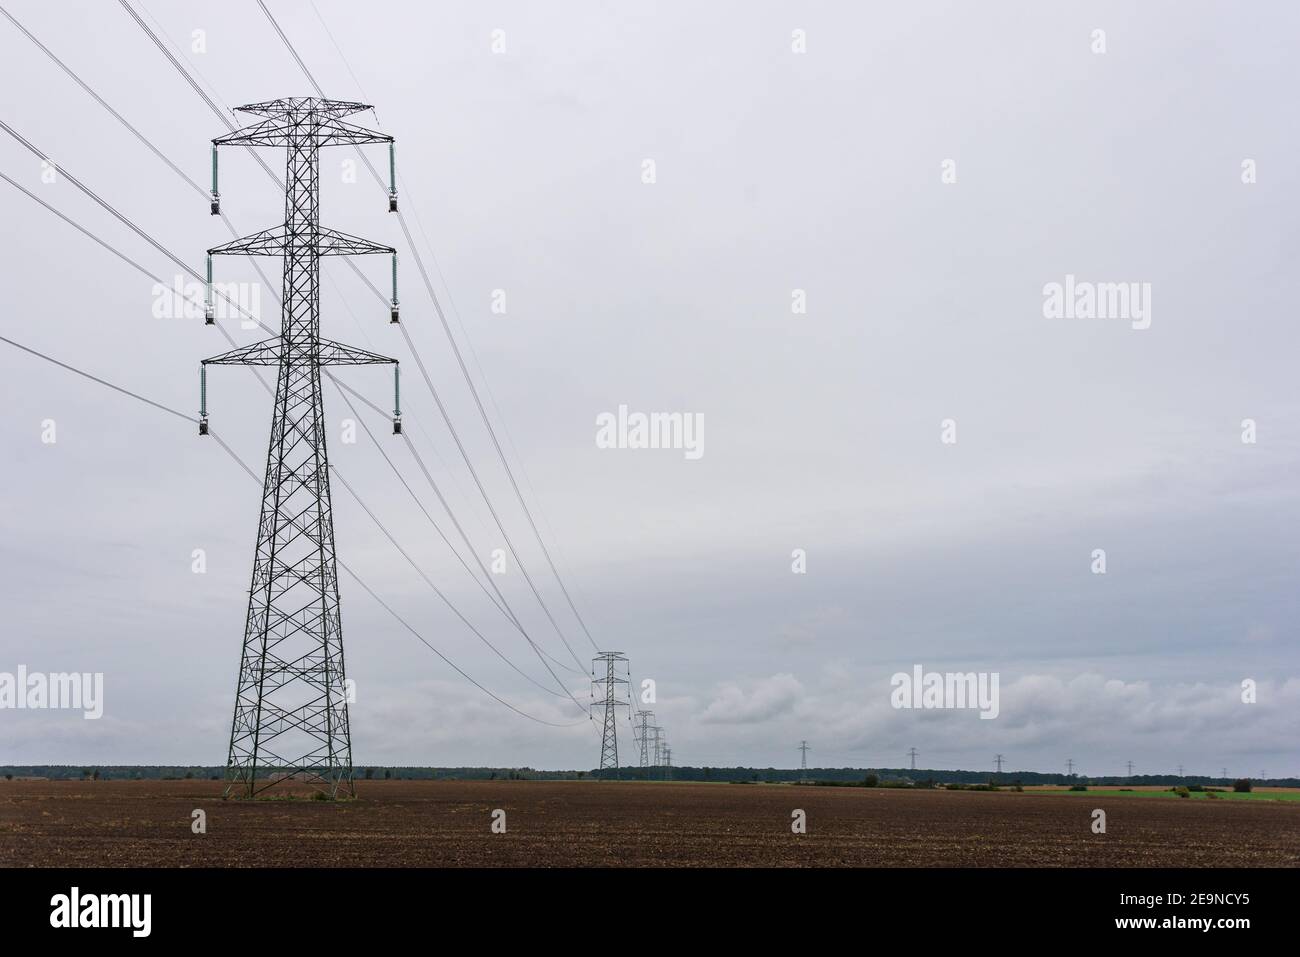 Extra-high voltage 400 kV overhead power line on large pylons, used for long distance, very high power transmission. Cloudy sky and copy space Stock Photo